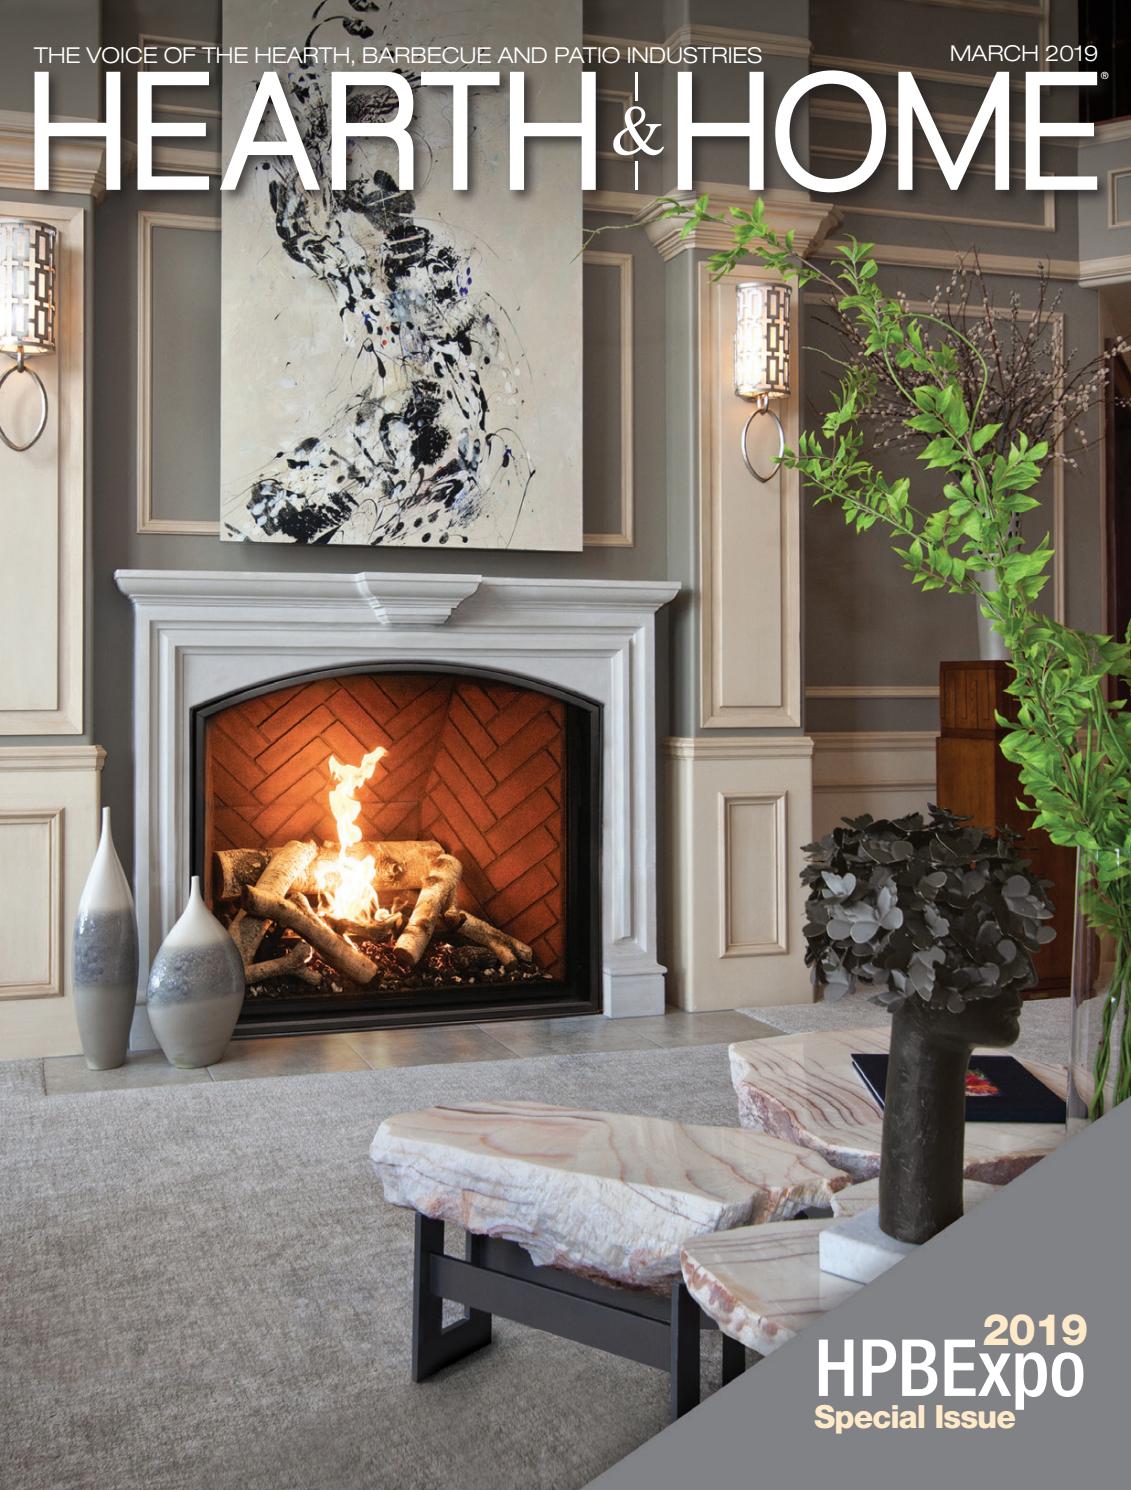 Double Sided Wood Fireplace Awesome Hearth & Home Magazine – 2019 March issue by Hearth & Home